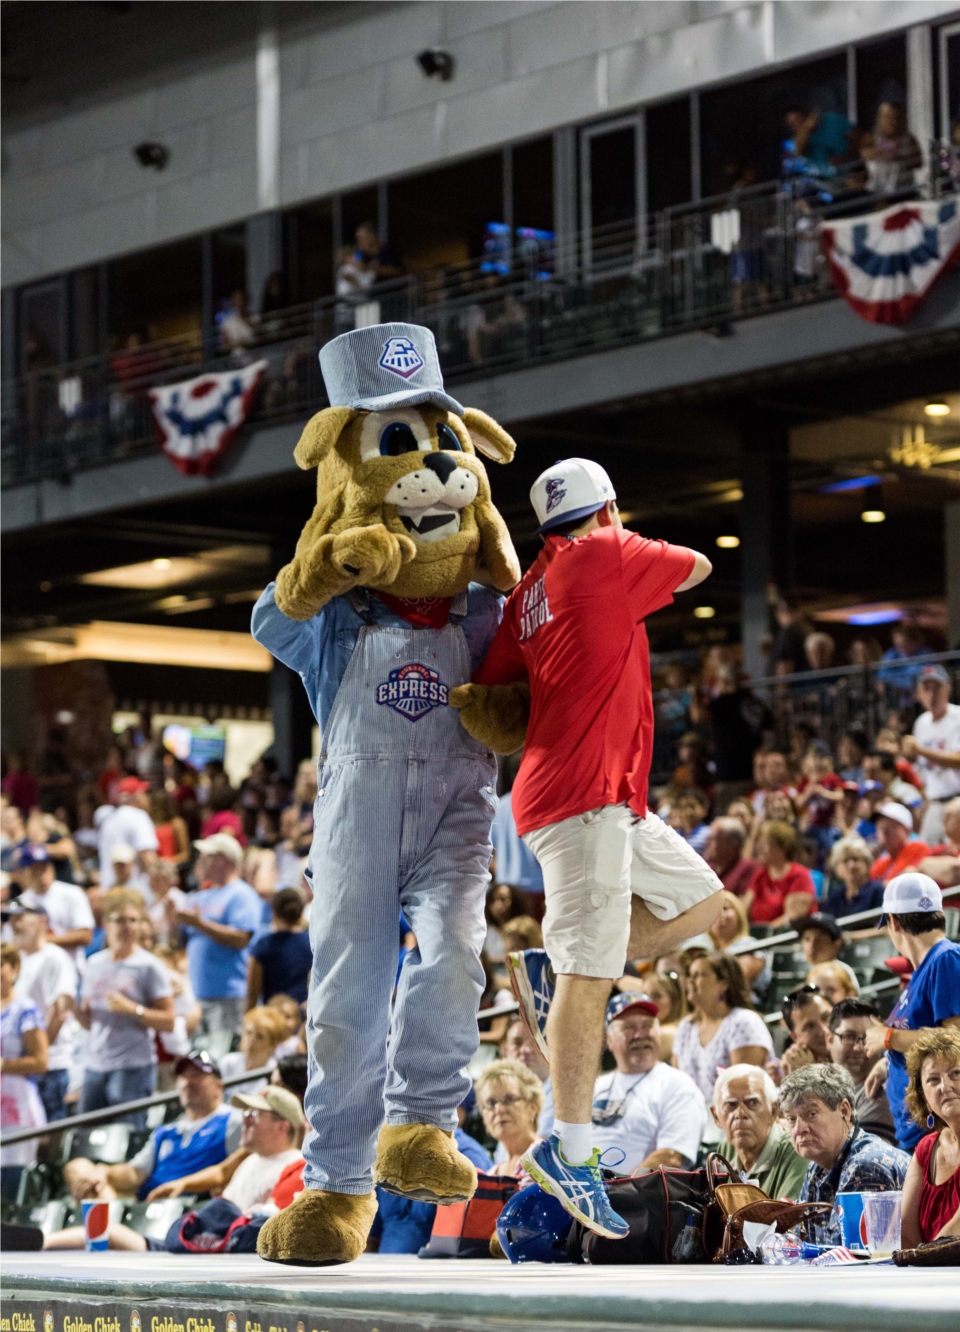 Spike the Round Rock Express mascot and staff dancing on the dugout at a game.  Courtesy Grease Man Photography